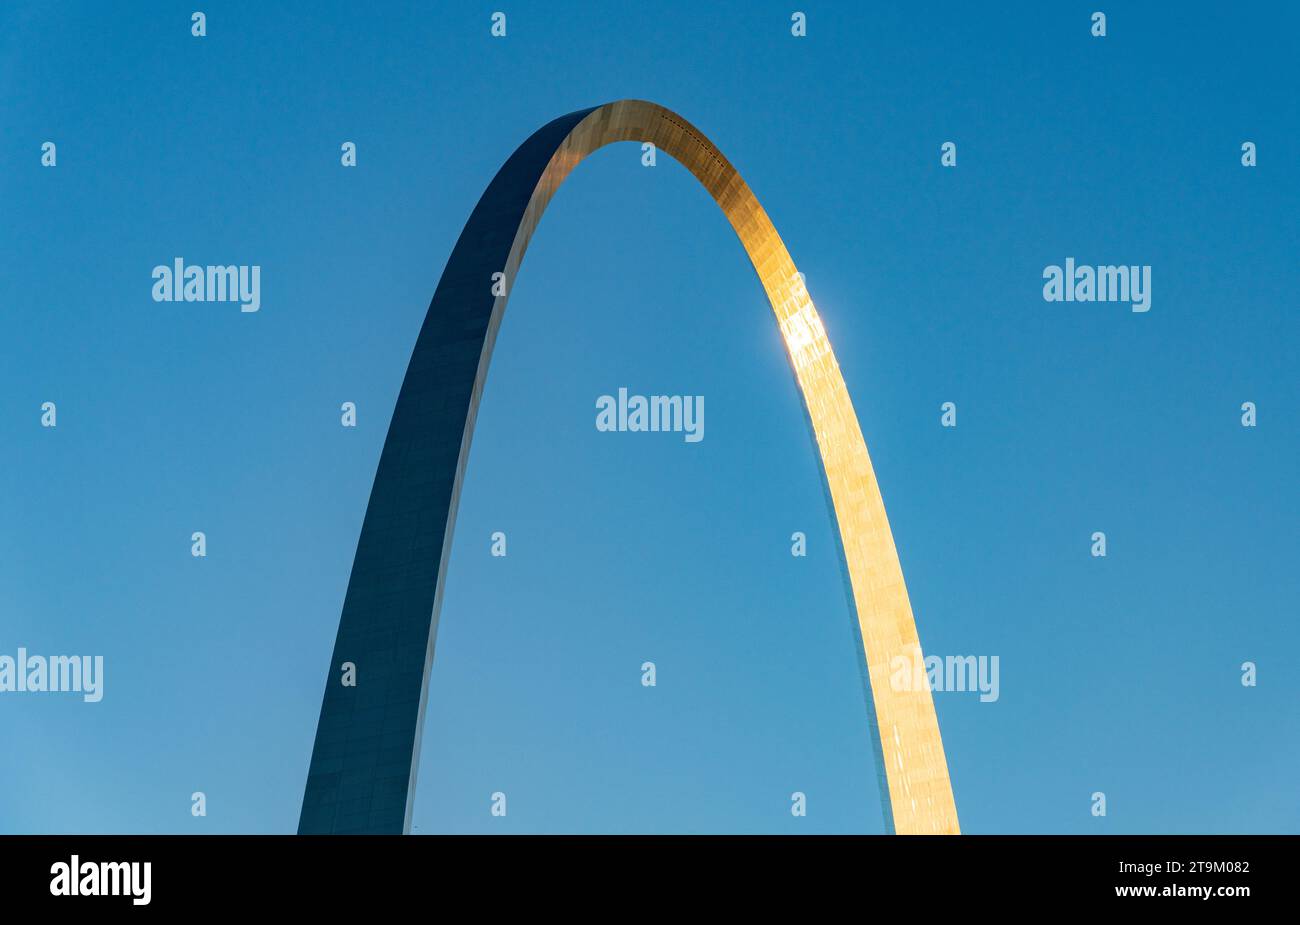 Simple abstract view of the Gateway Arch in St Louis at sunrise set against a plain blue sky Stock Photo